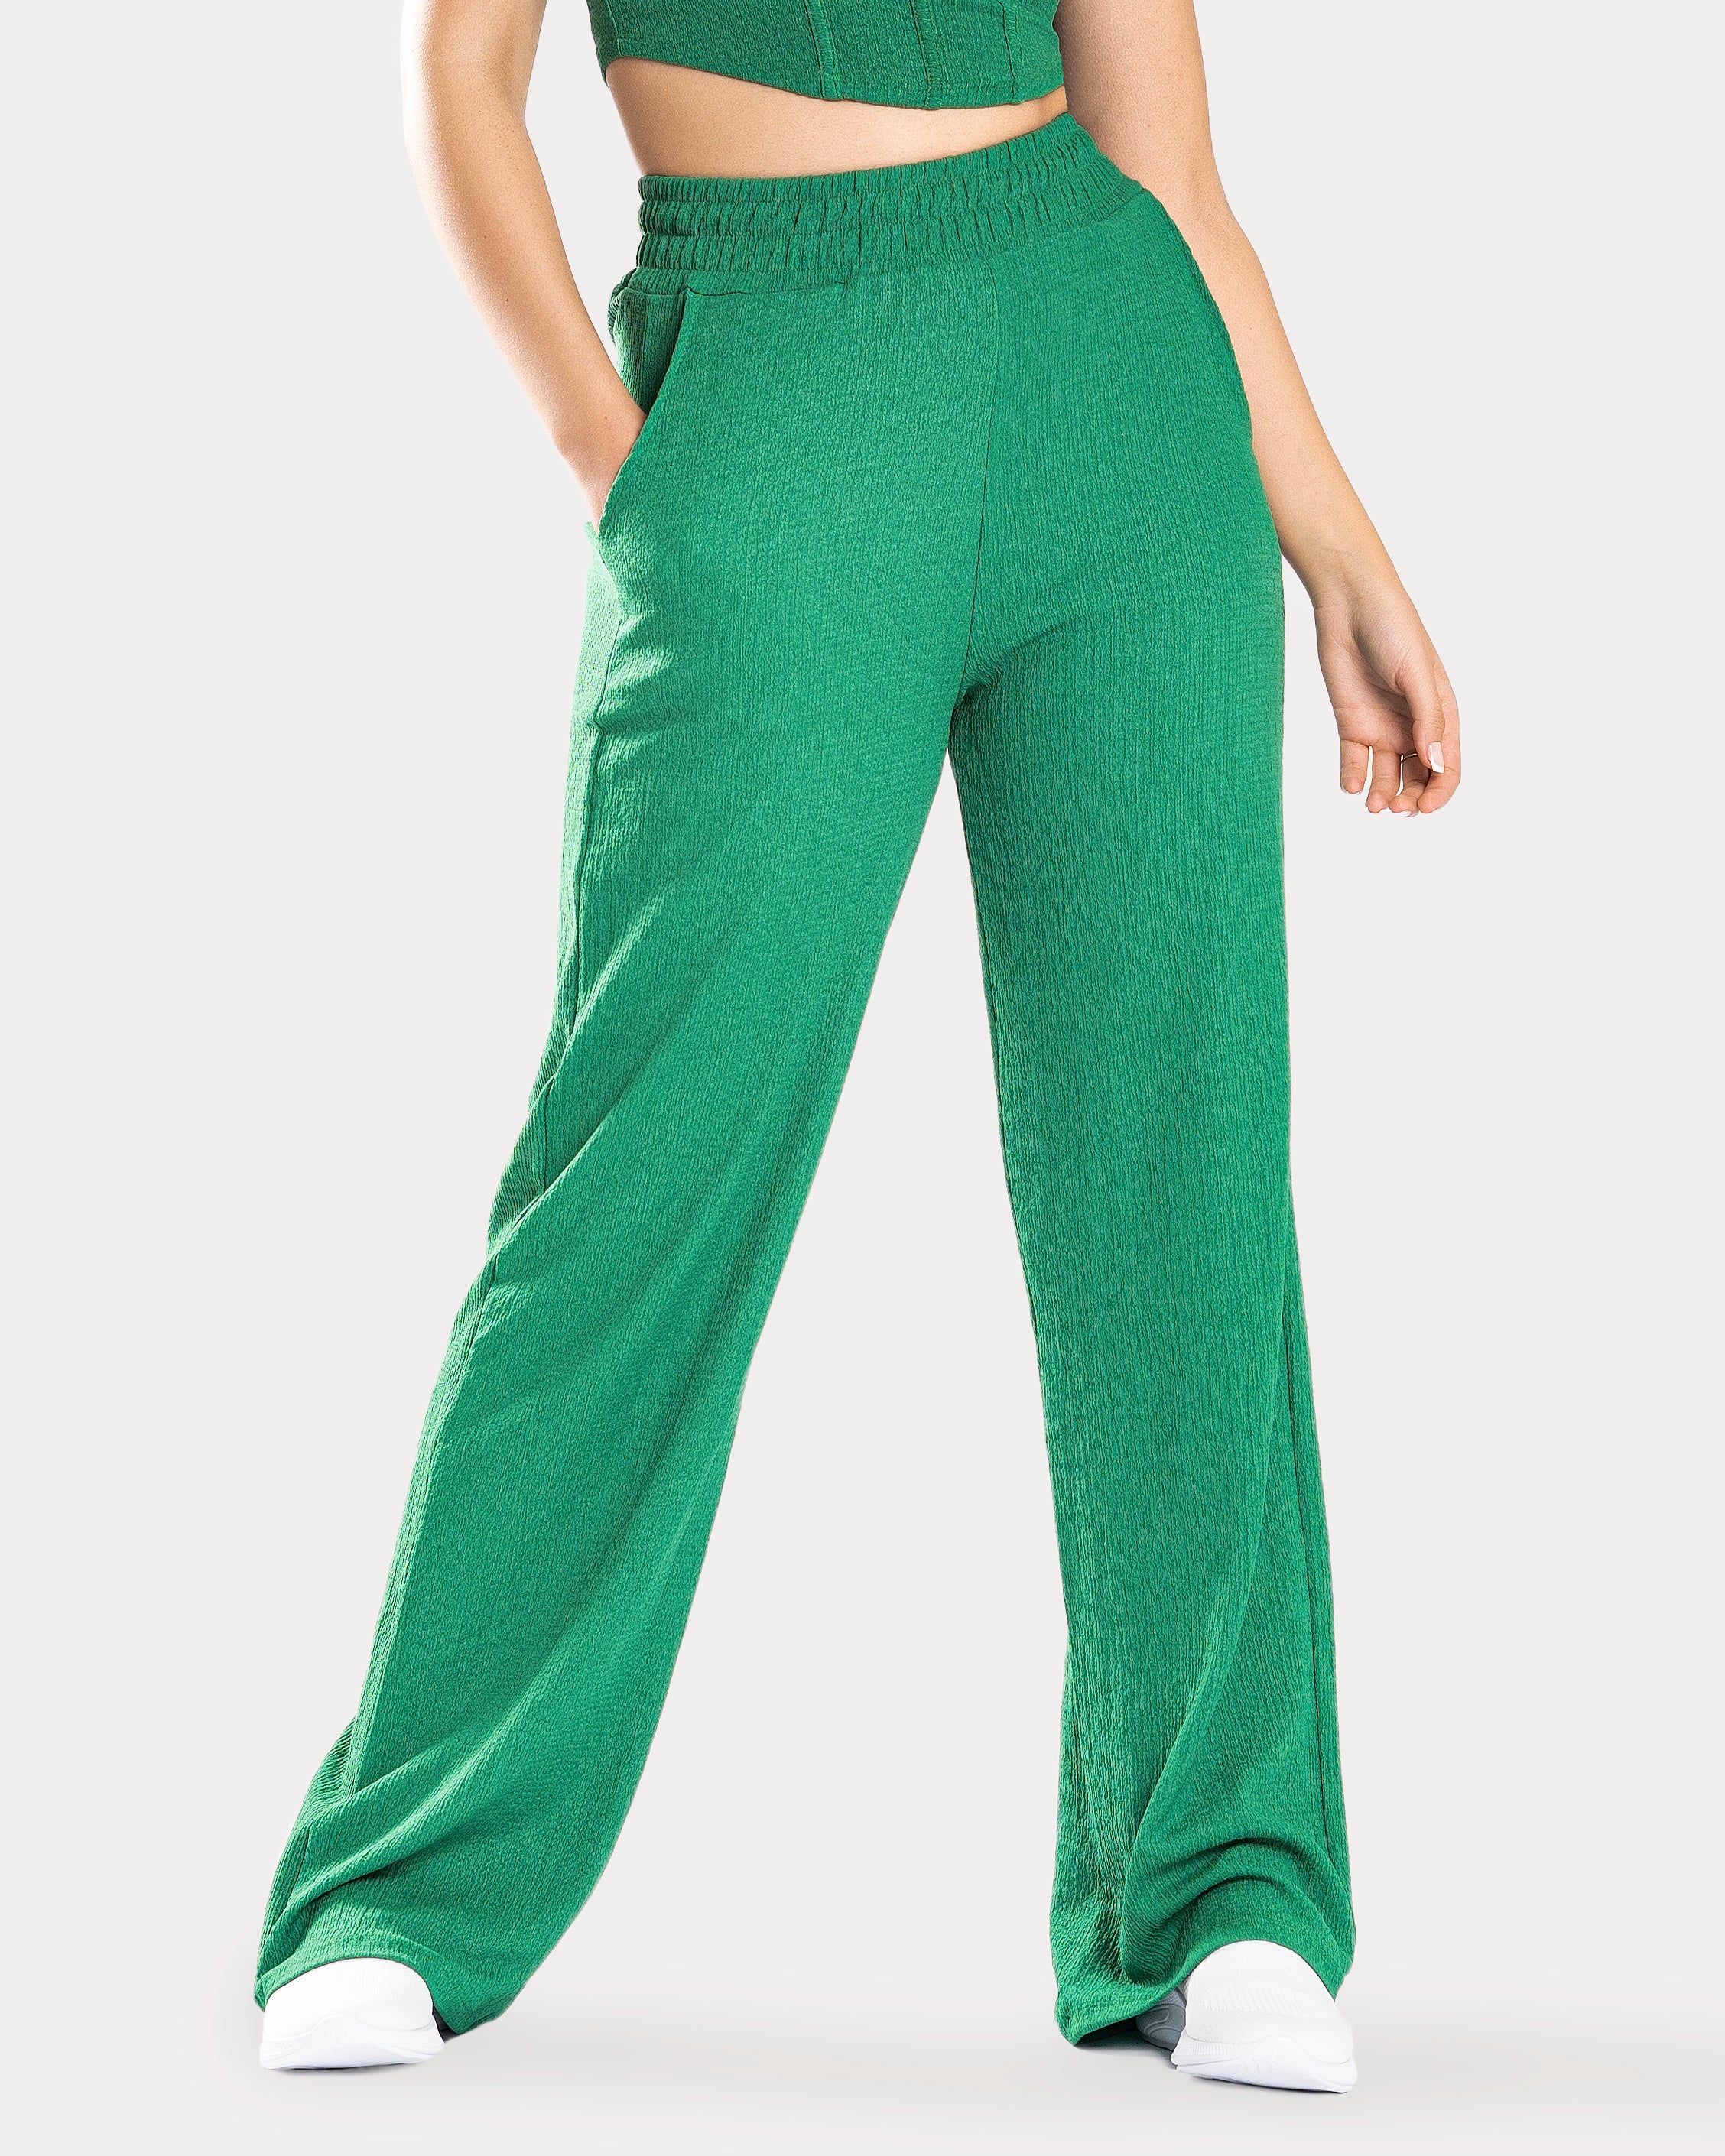 DIVON-Strong Green-Wide Leg Pant – Welcome